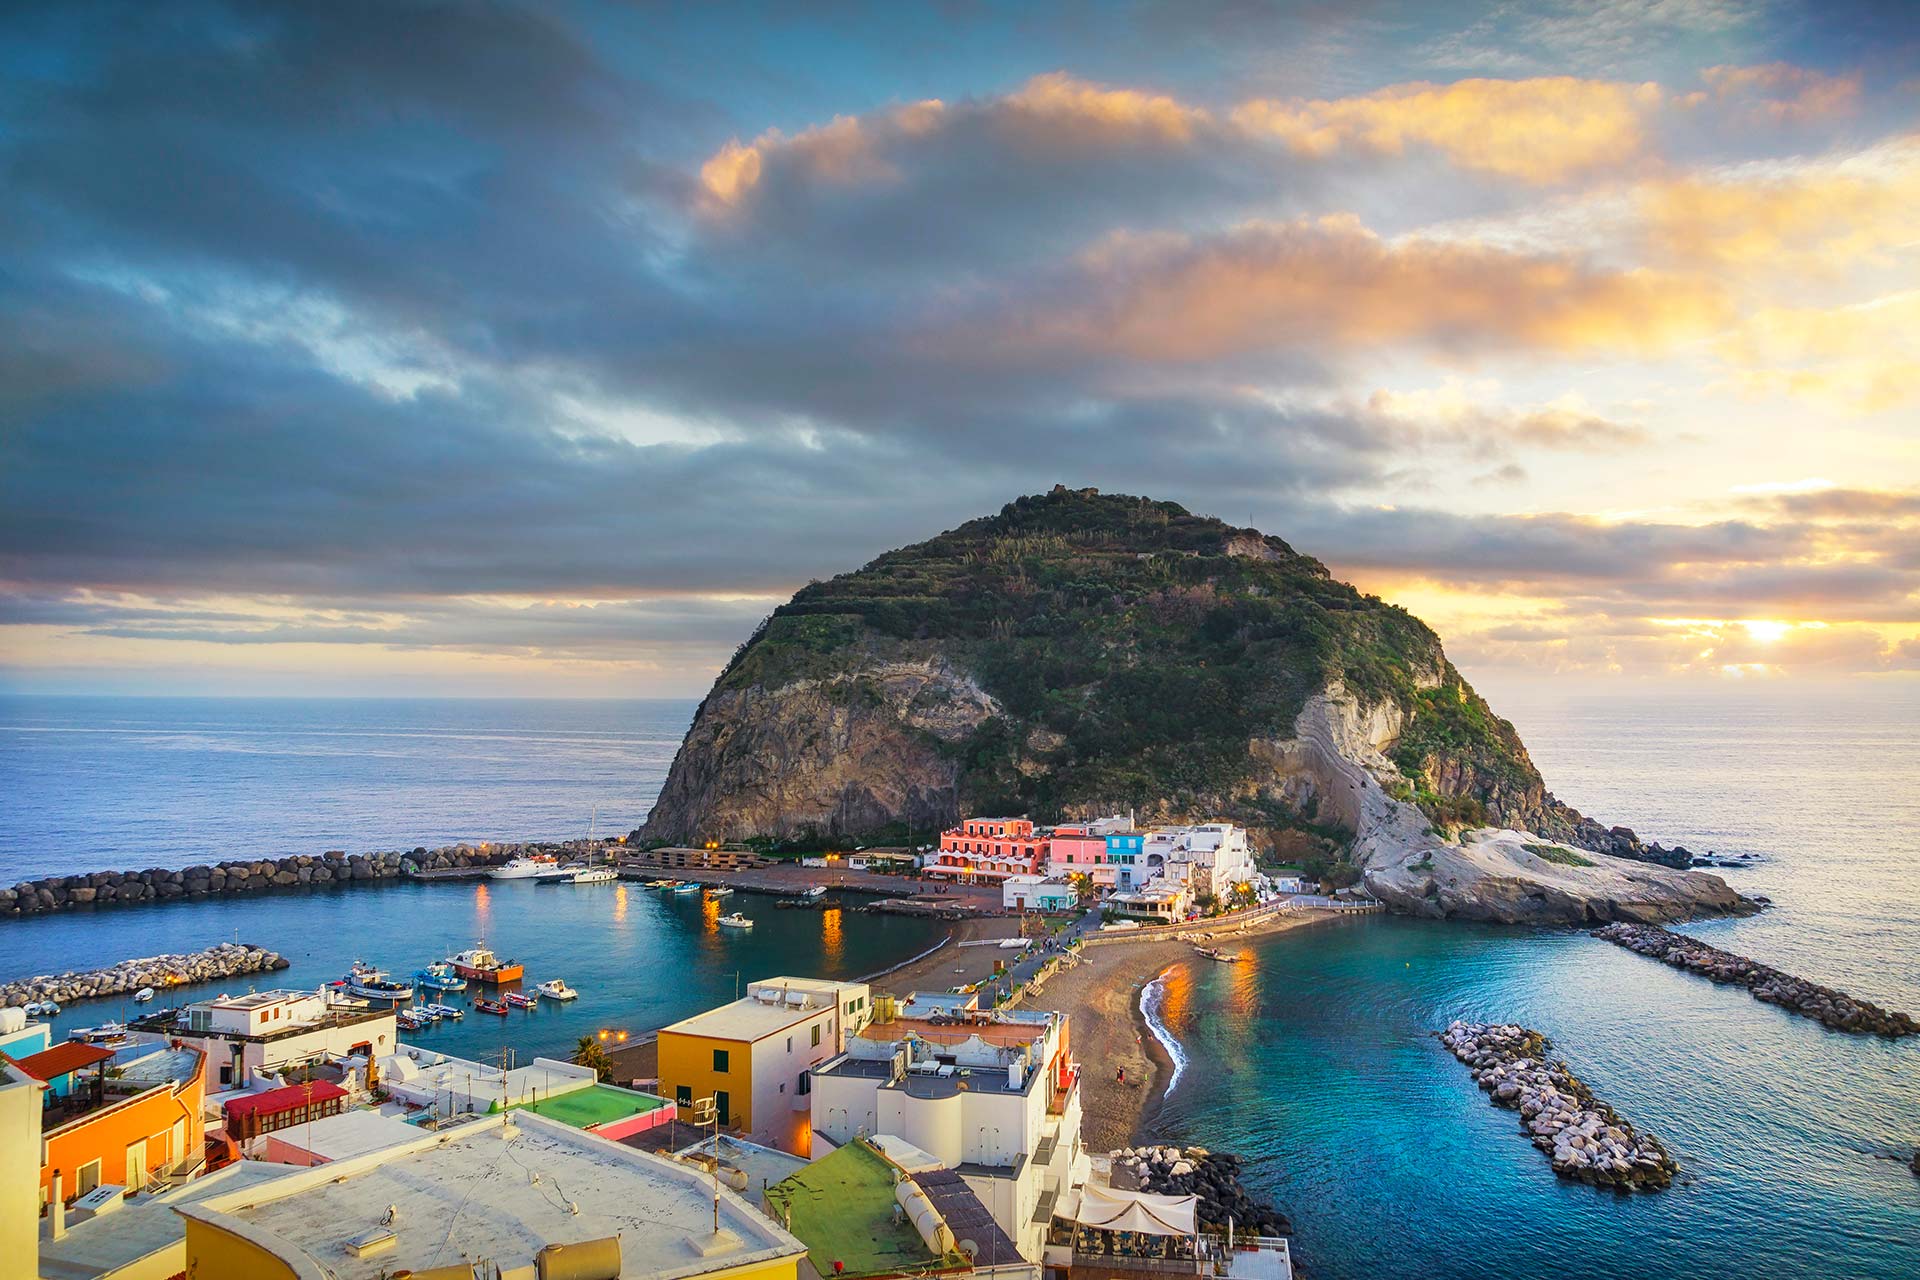 sant angelo beach and rocks in ischia island camp 2022-02